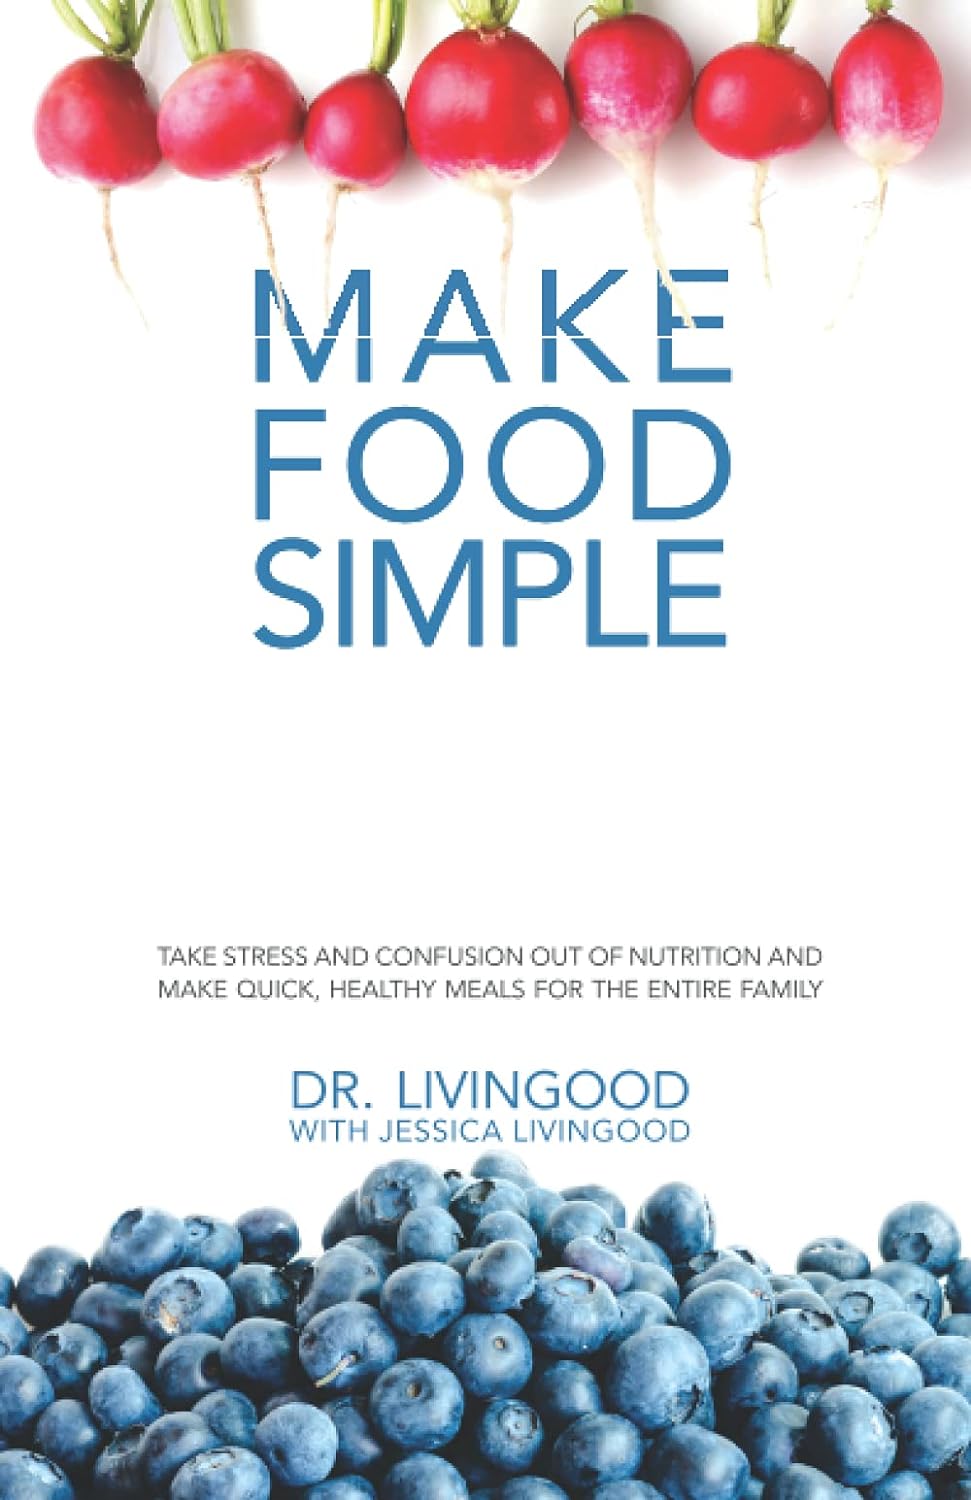 Make Food Simple: Take the Stress and Confusion Out of Nutrition And Make Quick, Healthy Meals For the Entire Family